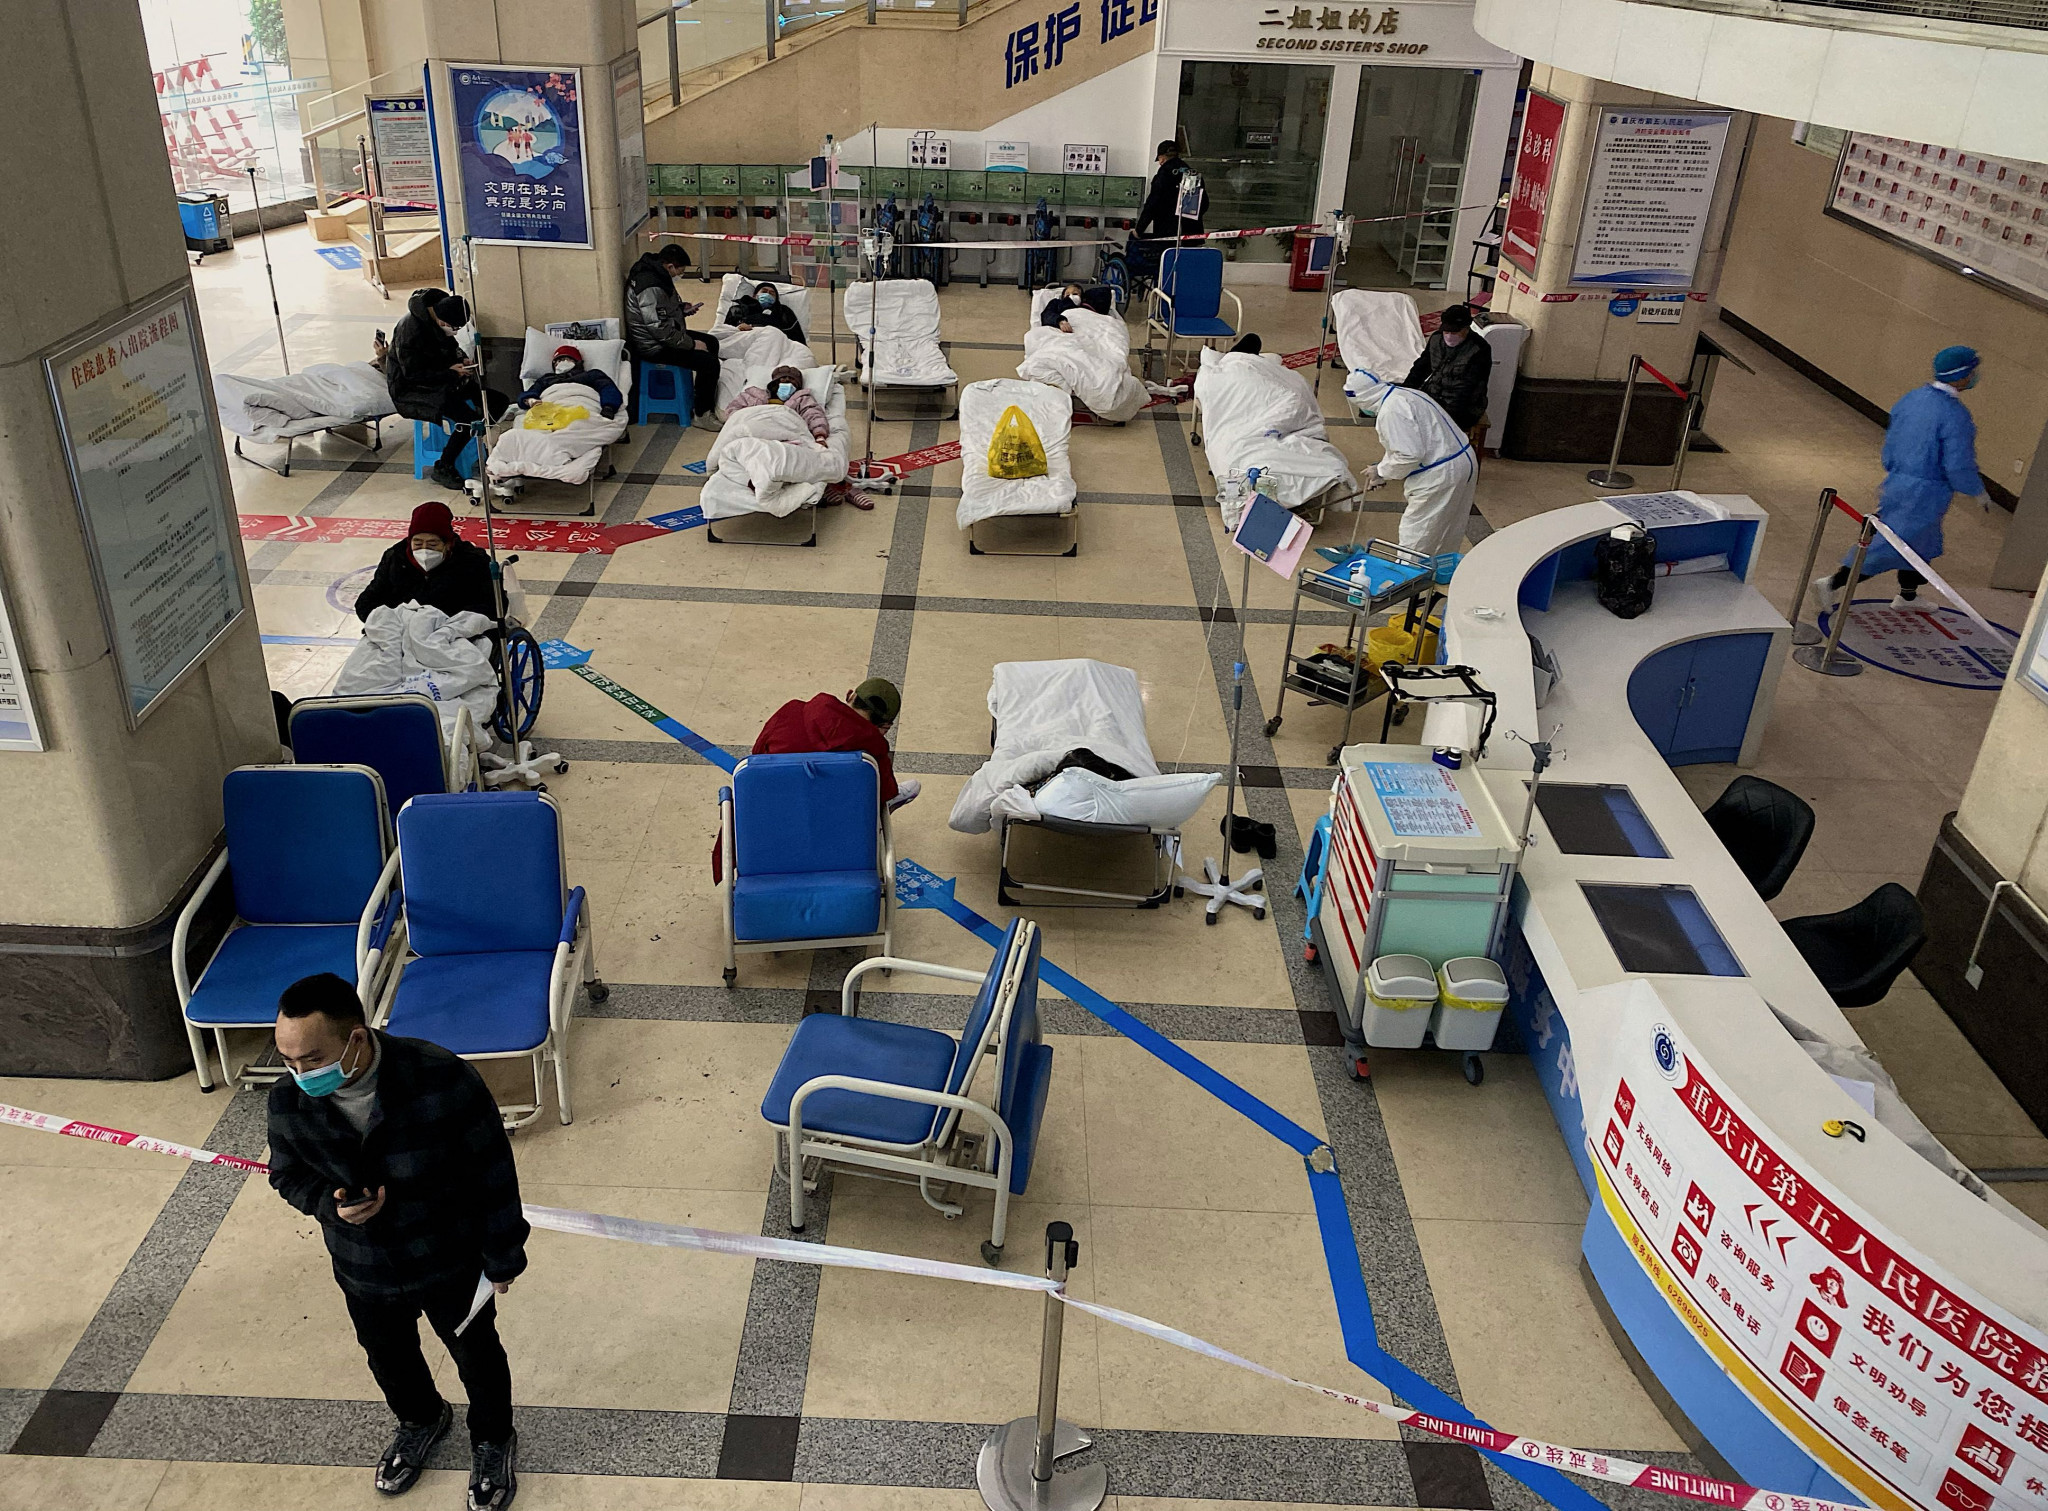 COVID-19 patients in the lobby of Chongqing hospital number 5 in Southern China, where official casualty figures are being questioned ©Getty Images